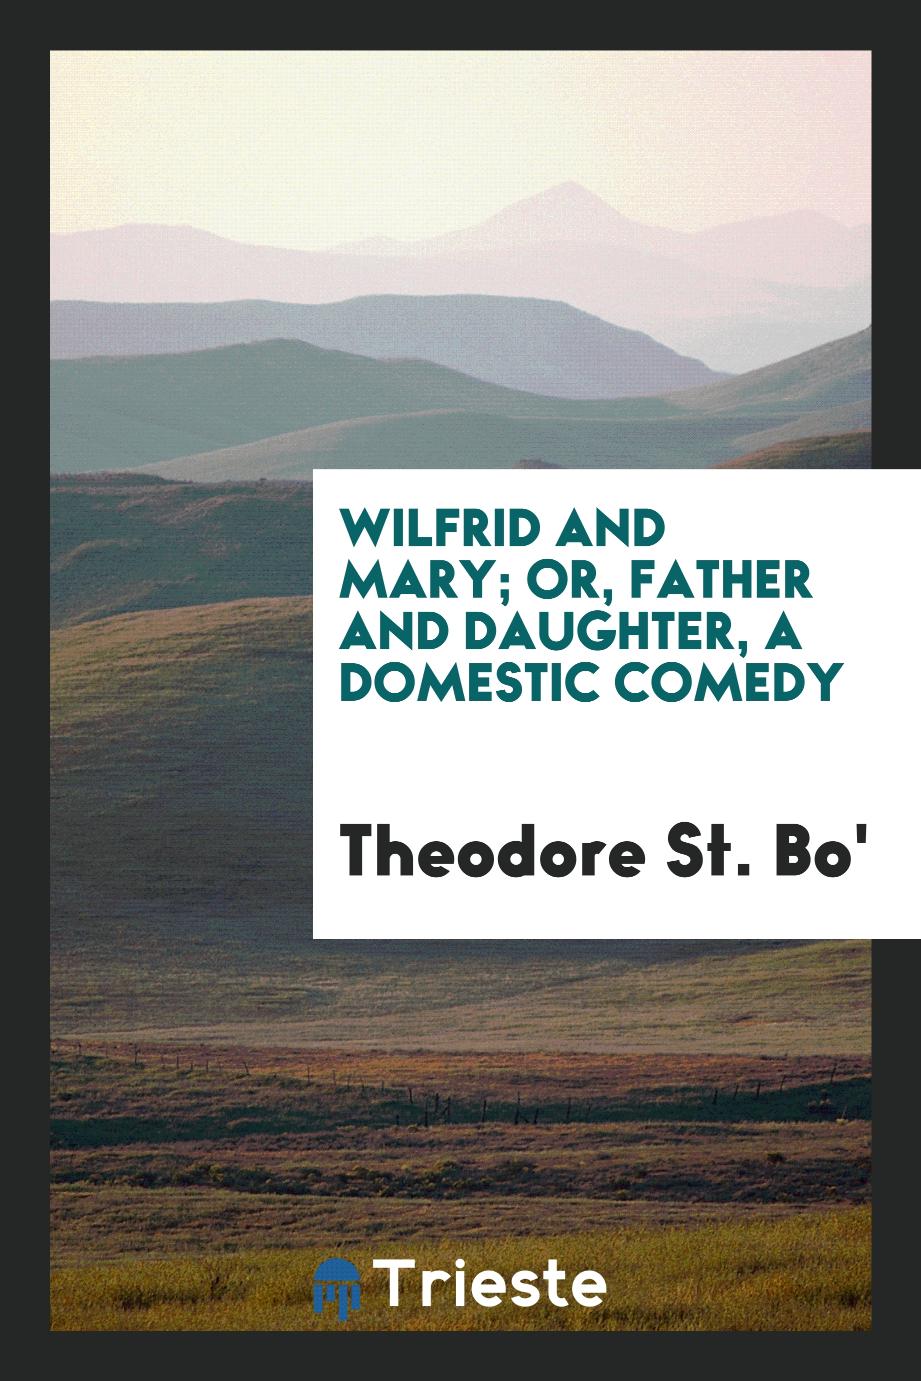 Wilfrid and Mary; or, Father and daughter, a domestic comedy